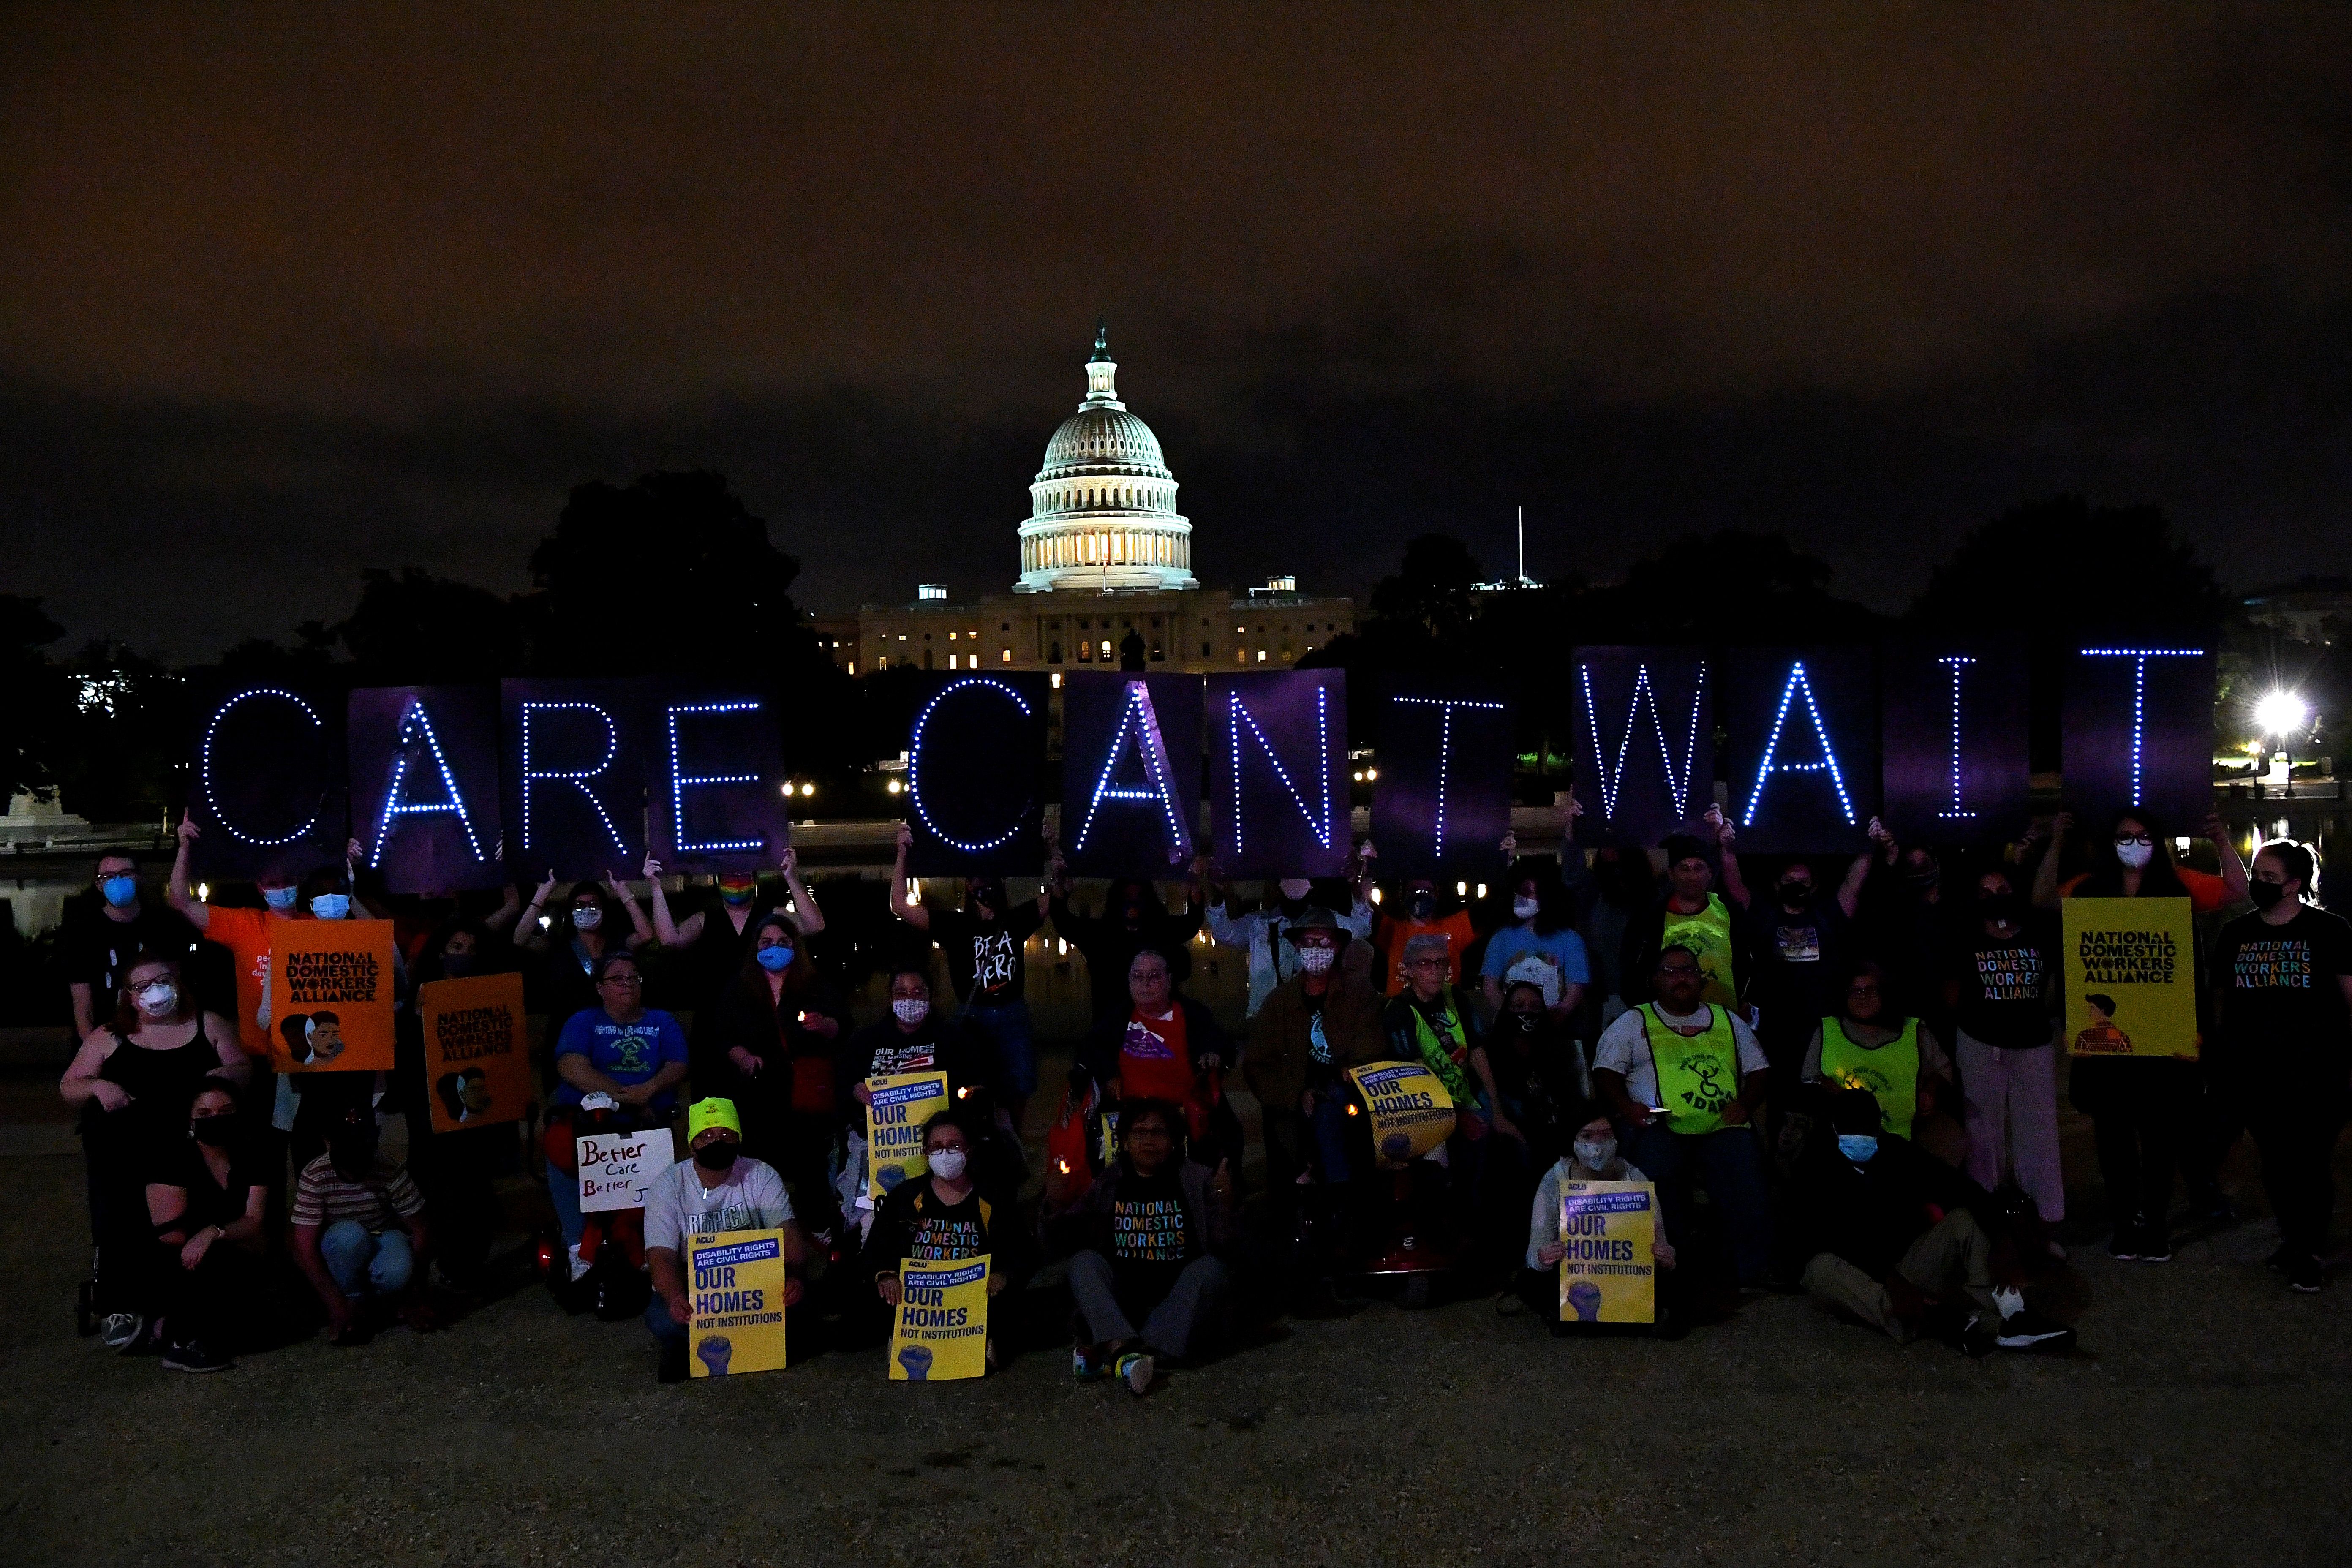 A crowd of people in front of the U.S. Capitol at night hold up an illuminated sign that reads "Care Can't Wait".